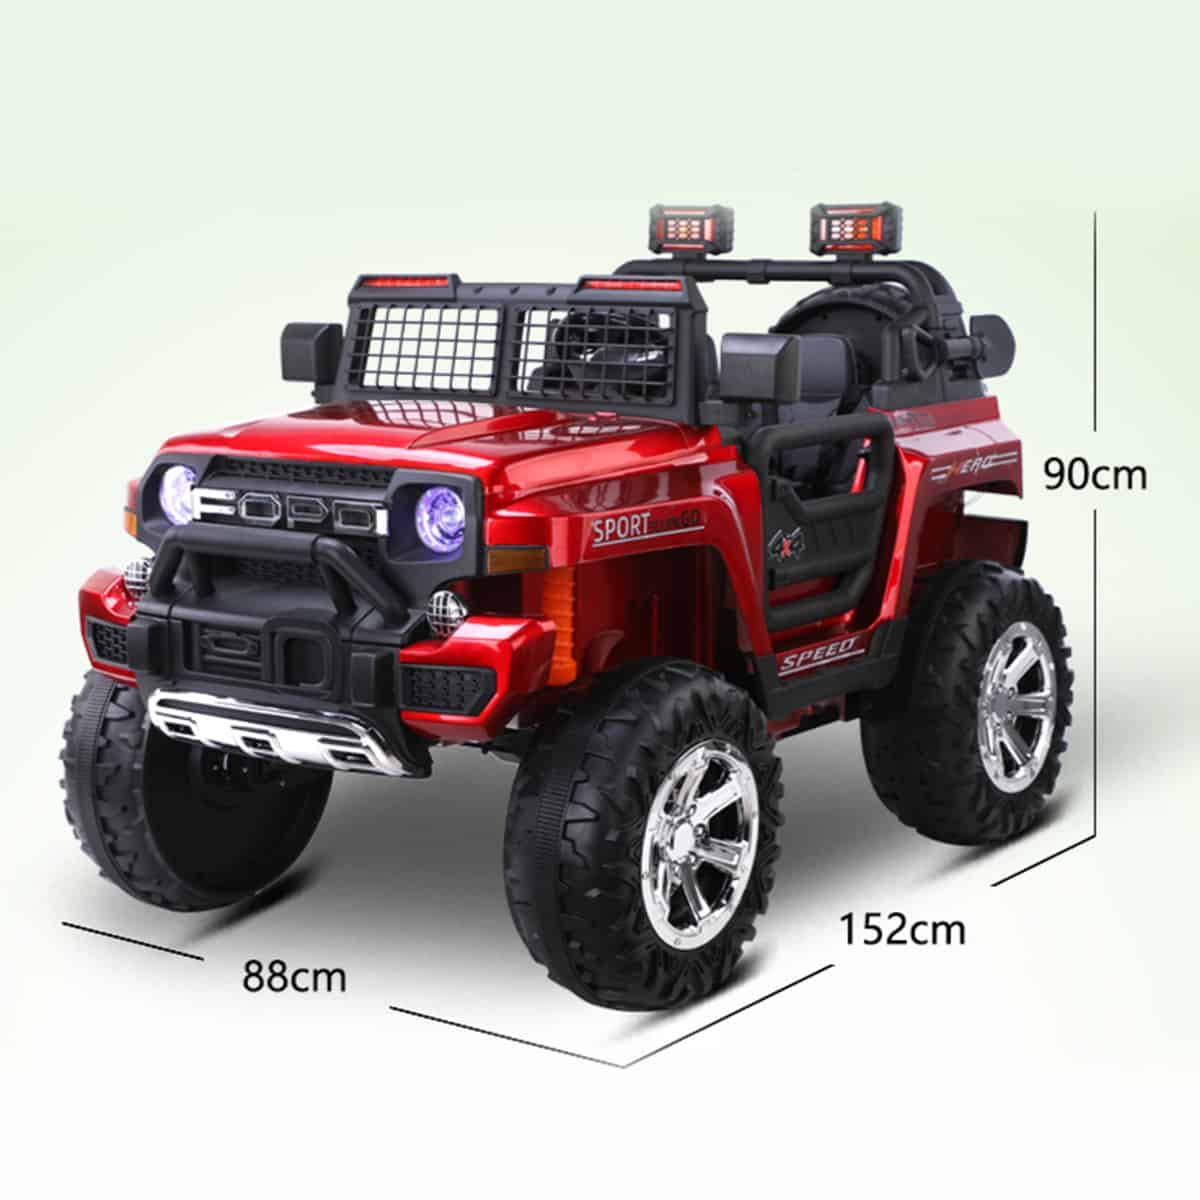 Ride on jeep | model LW-9199 | electric ride on | kids toys 4x4 jeep